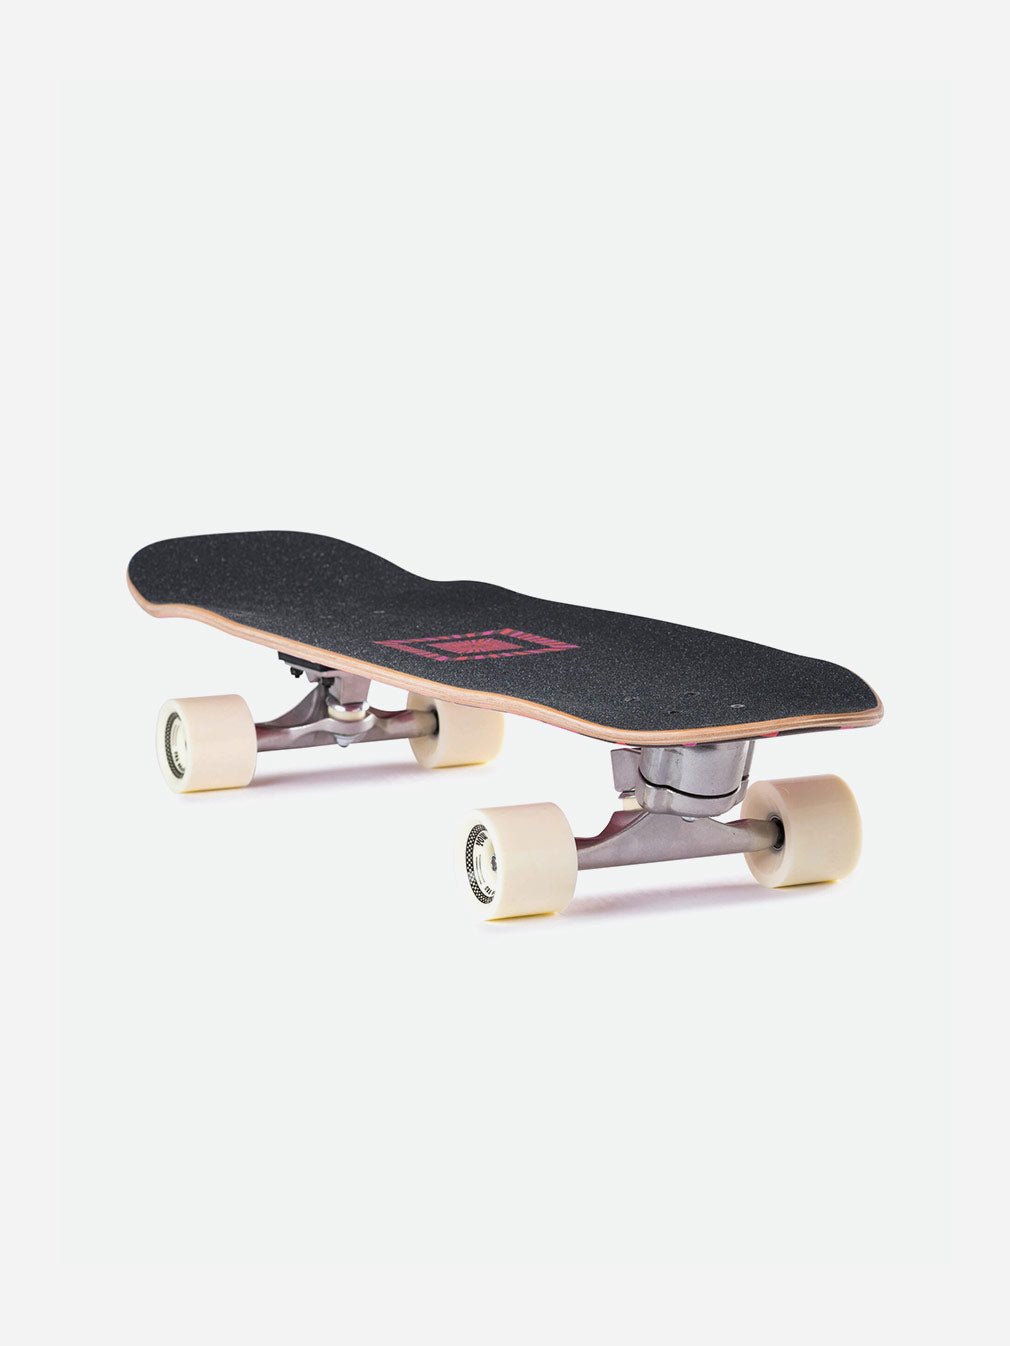 YOW Snappers 32.5" Surfskate | 2024 - Youth Lagoon